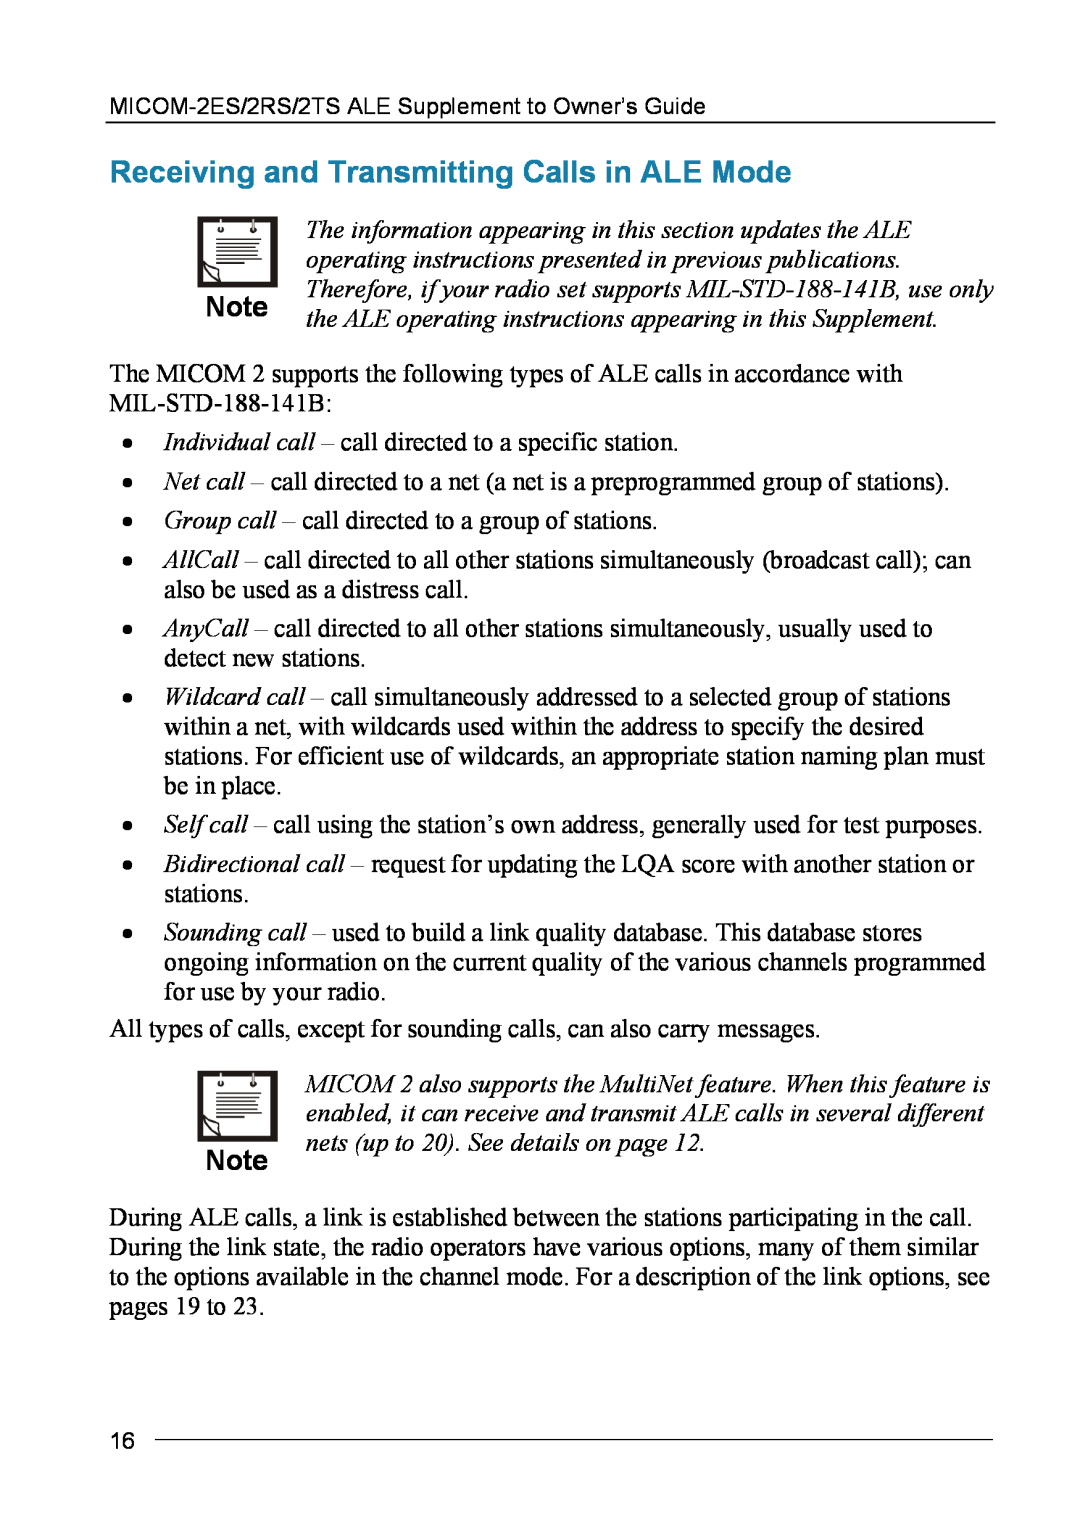 Motorola MICOM-2ES/2RS/2TS ALE manual Receiving and Transmitting Calls in ALE Mode 